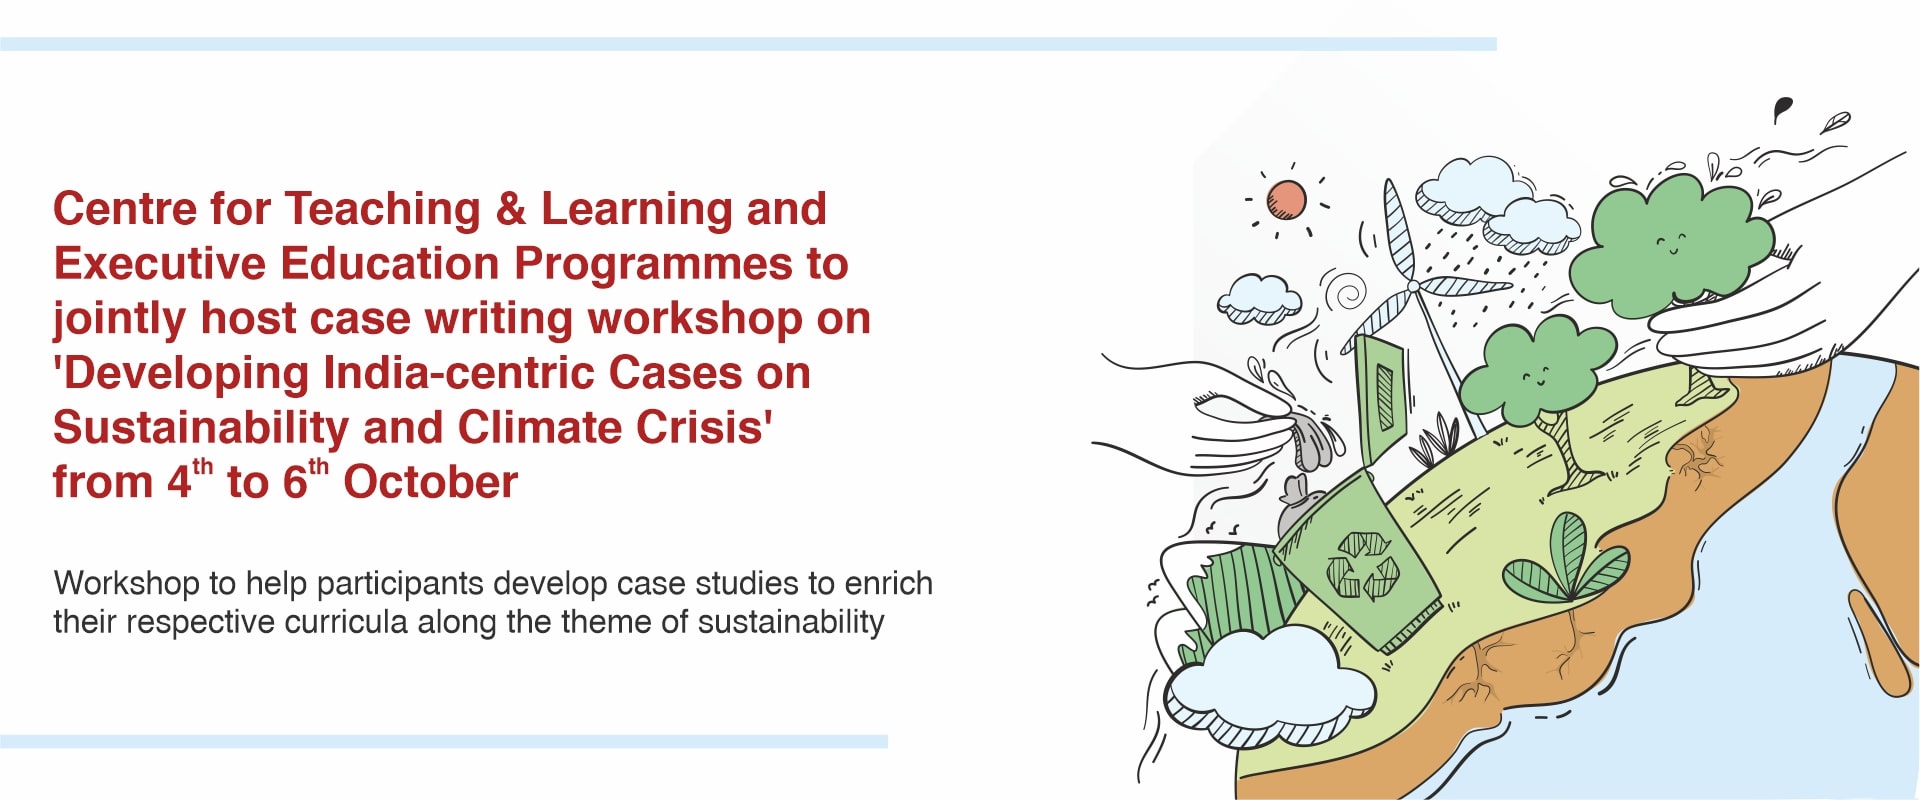 Centre for Teaching & Learning and Executive Education Programmes to jointly host case writing workshop on ‘Developing India-centric Cases on Sustainability and Climate Crisis’ from 4th to 6th October